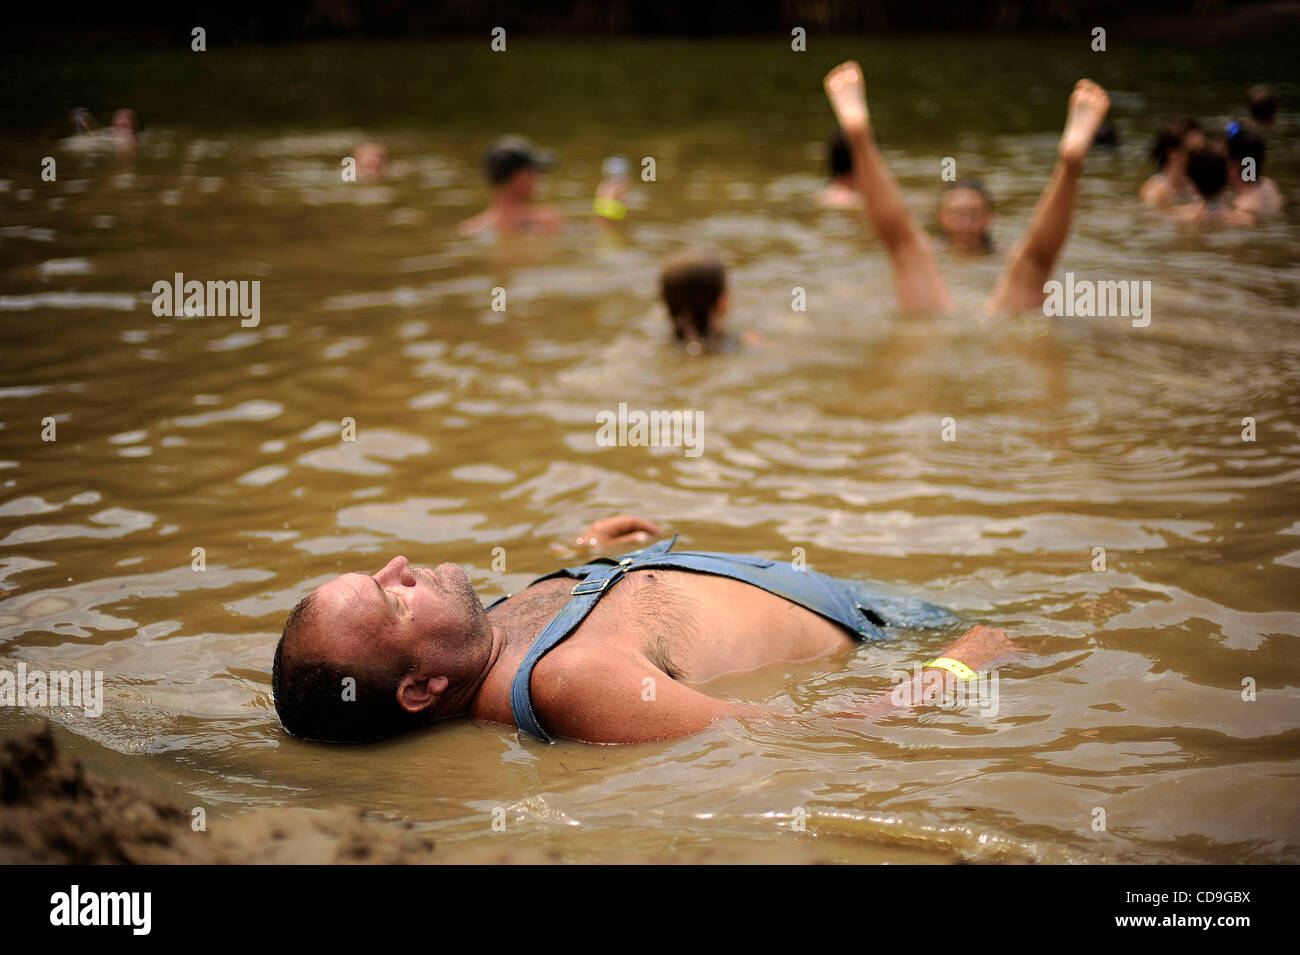 SATURDAY JULY 10, 2010 EAST DUBLIN, GEORGIA -A drunk Redneck Games participant  lies in the river at Buckeye Park during the Redneck Games in East Dublin, Georgia. The games started in 1996 as spoof on the Olympics which were being held in Atlanta, Georgia at the time. participants compete in events Stock Photo